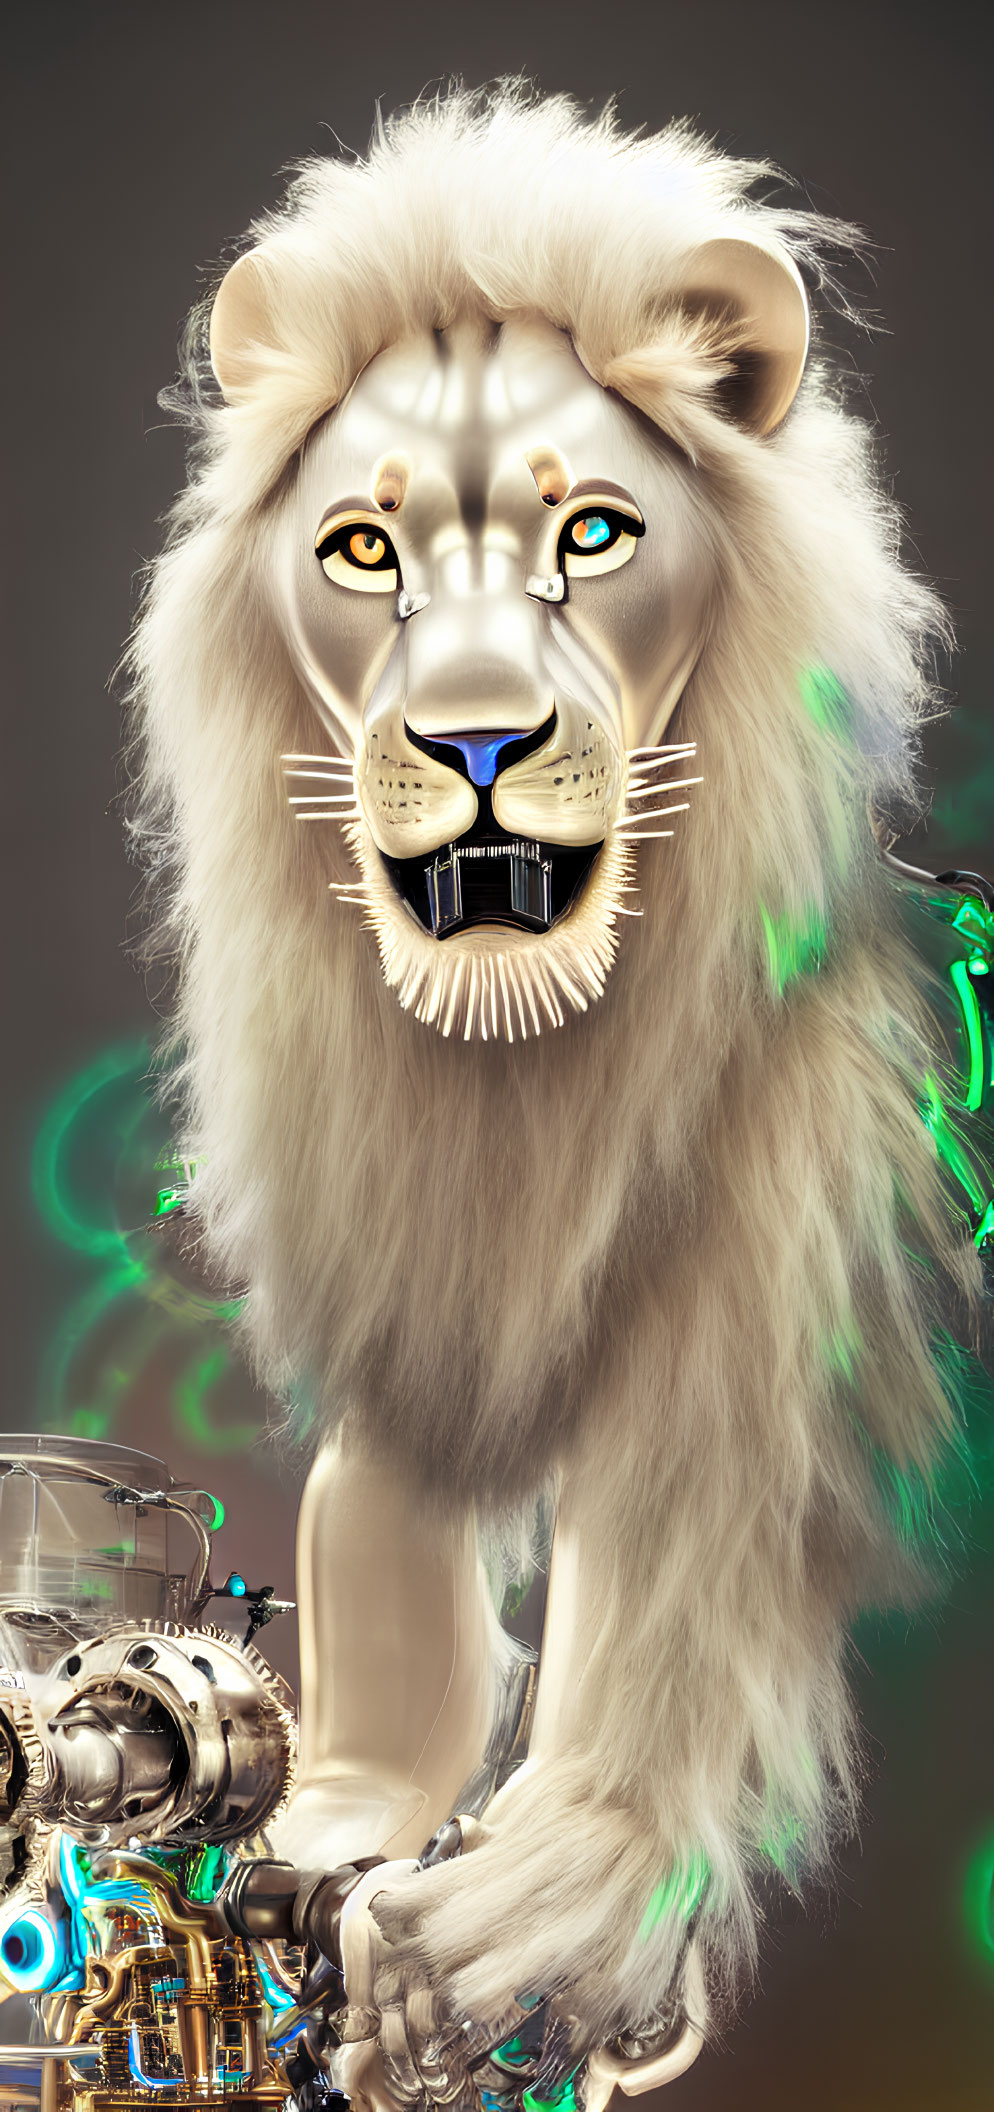 Digital artwork of lion with human-like pose and expression, blending organic and mechanical elements.